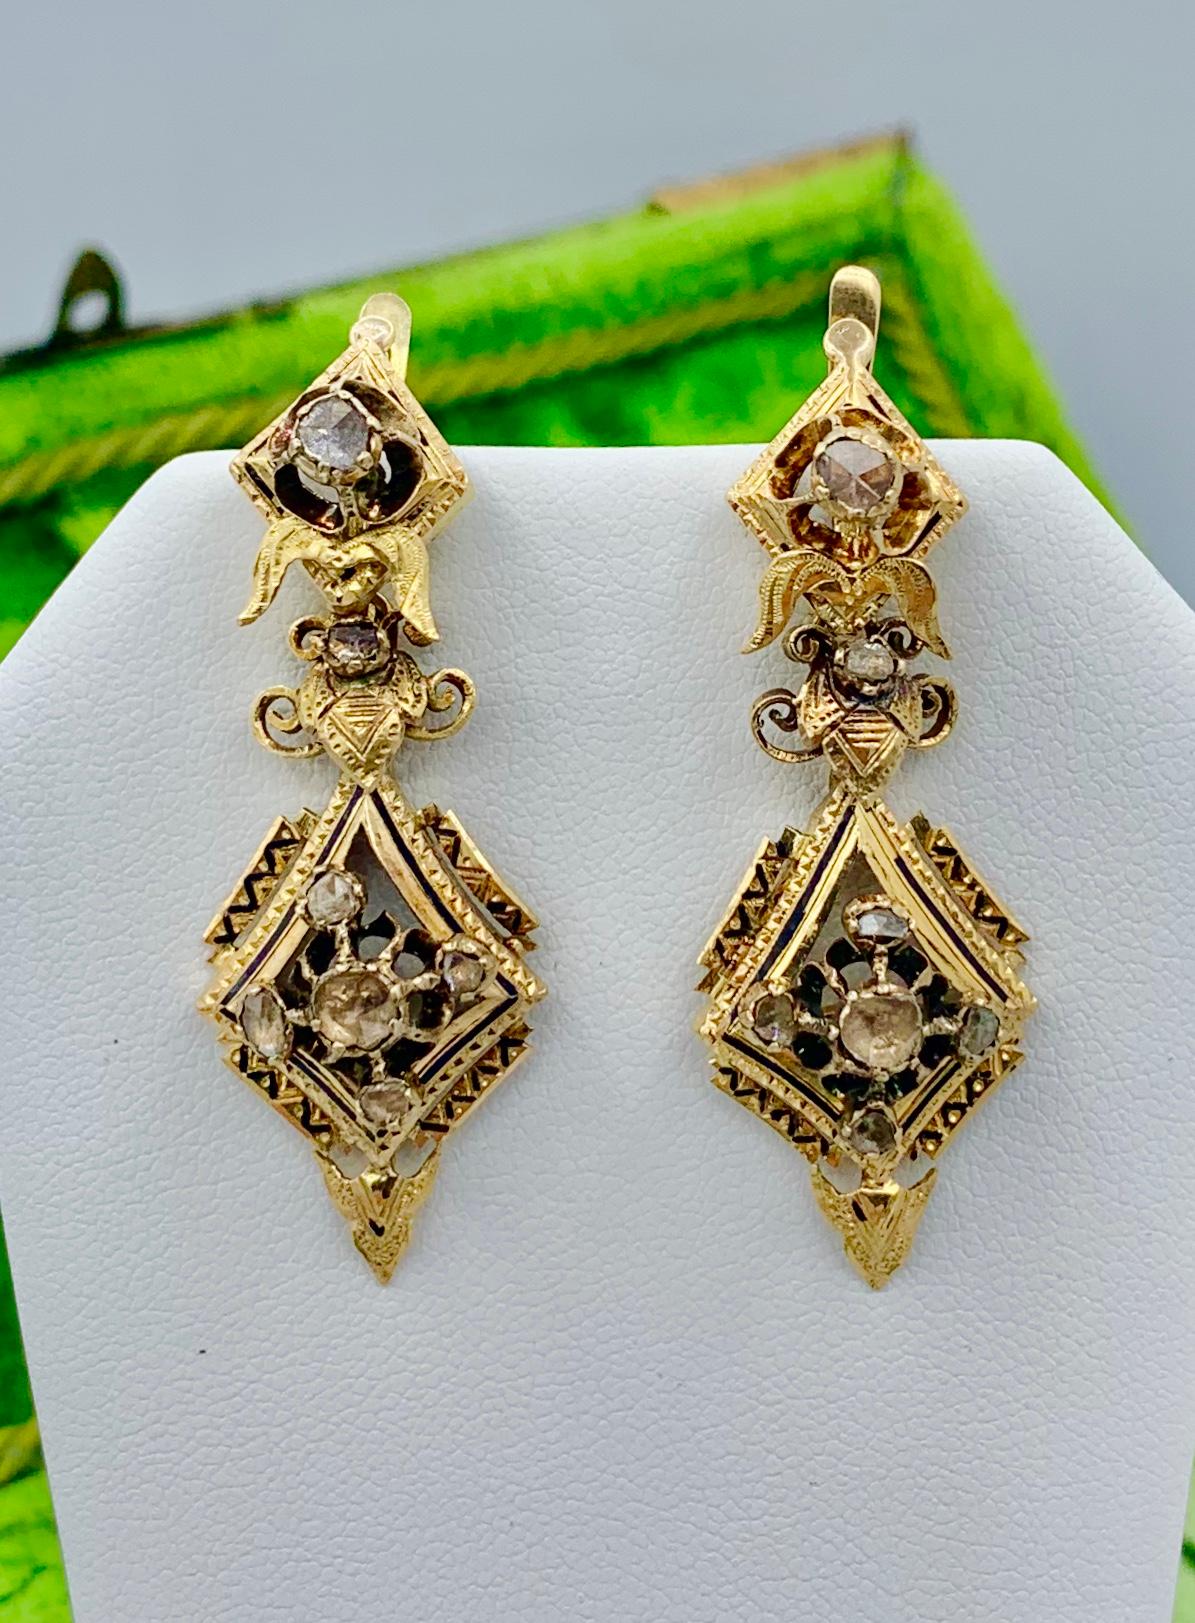 This is very rare pair of early Rose Cut Diamond Antique Georgian - Victorian Dangle Drop Day Night Earrings in 18 Karat Gold with Enamel adornment.   These antique earrings are of the highest quality.  They have extraordinary design with three